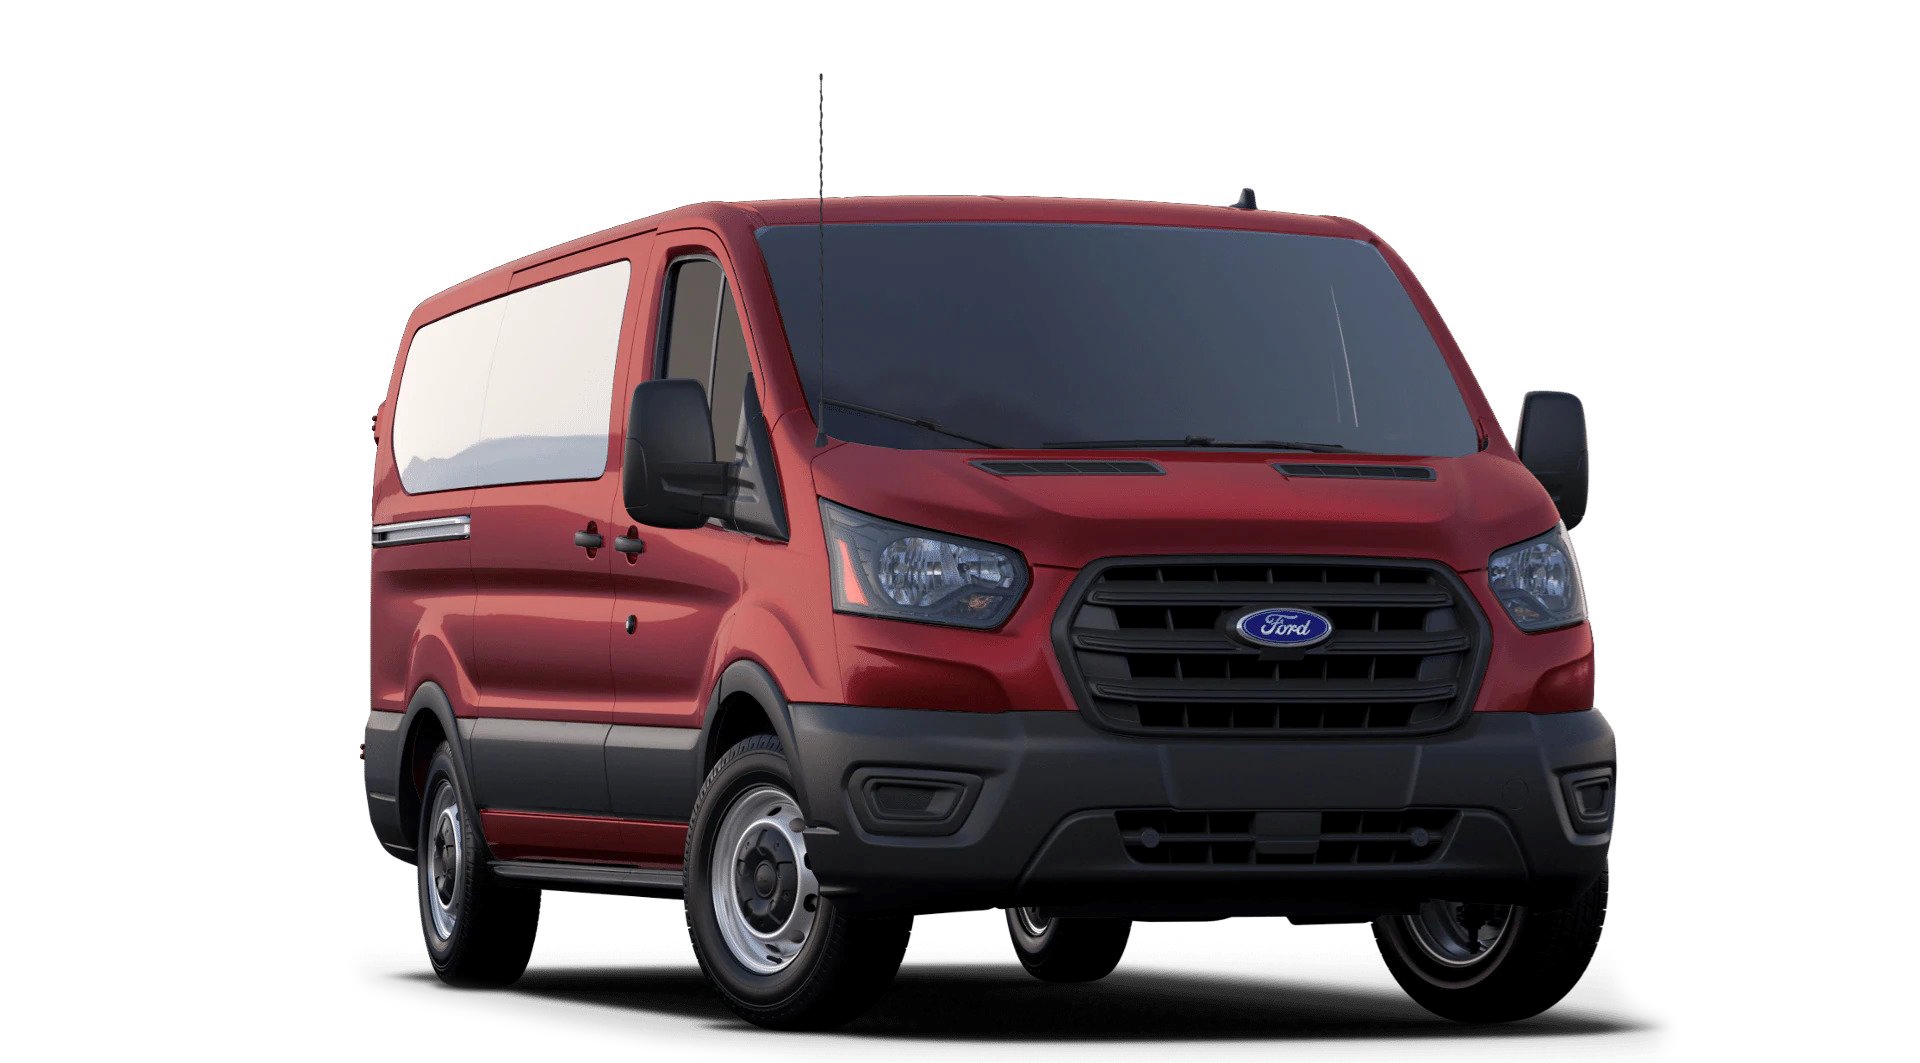 2021 Ford Transit Passenger Van 350 XLT Full Specs, Features and Price